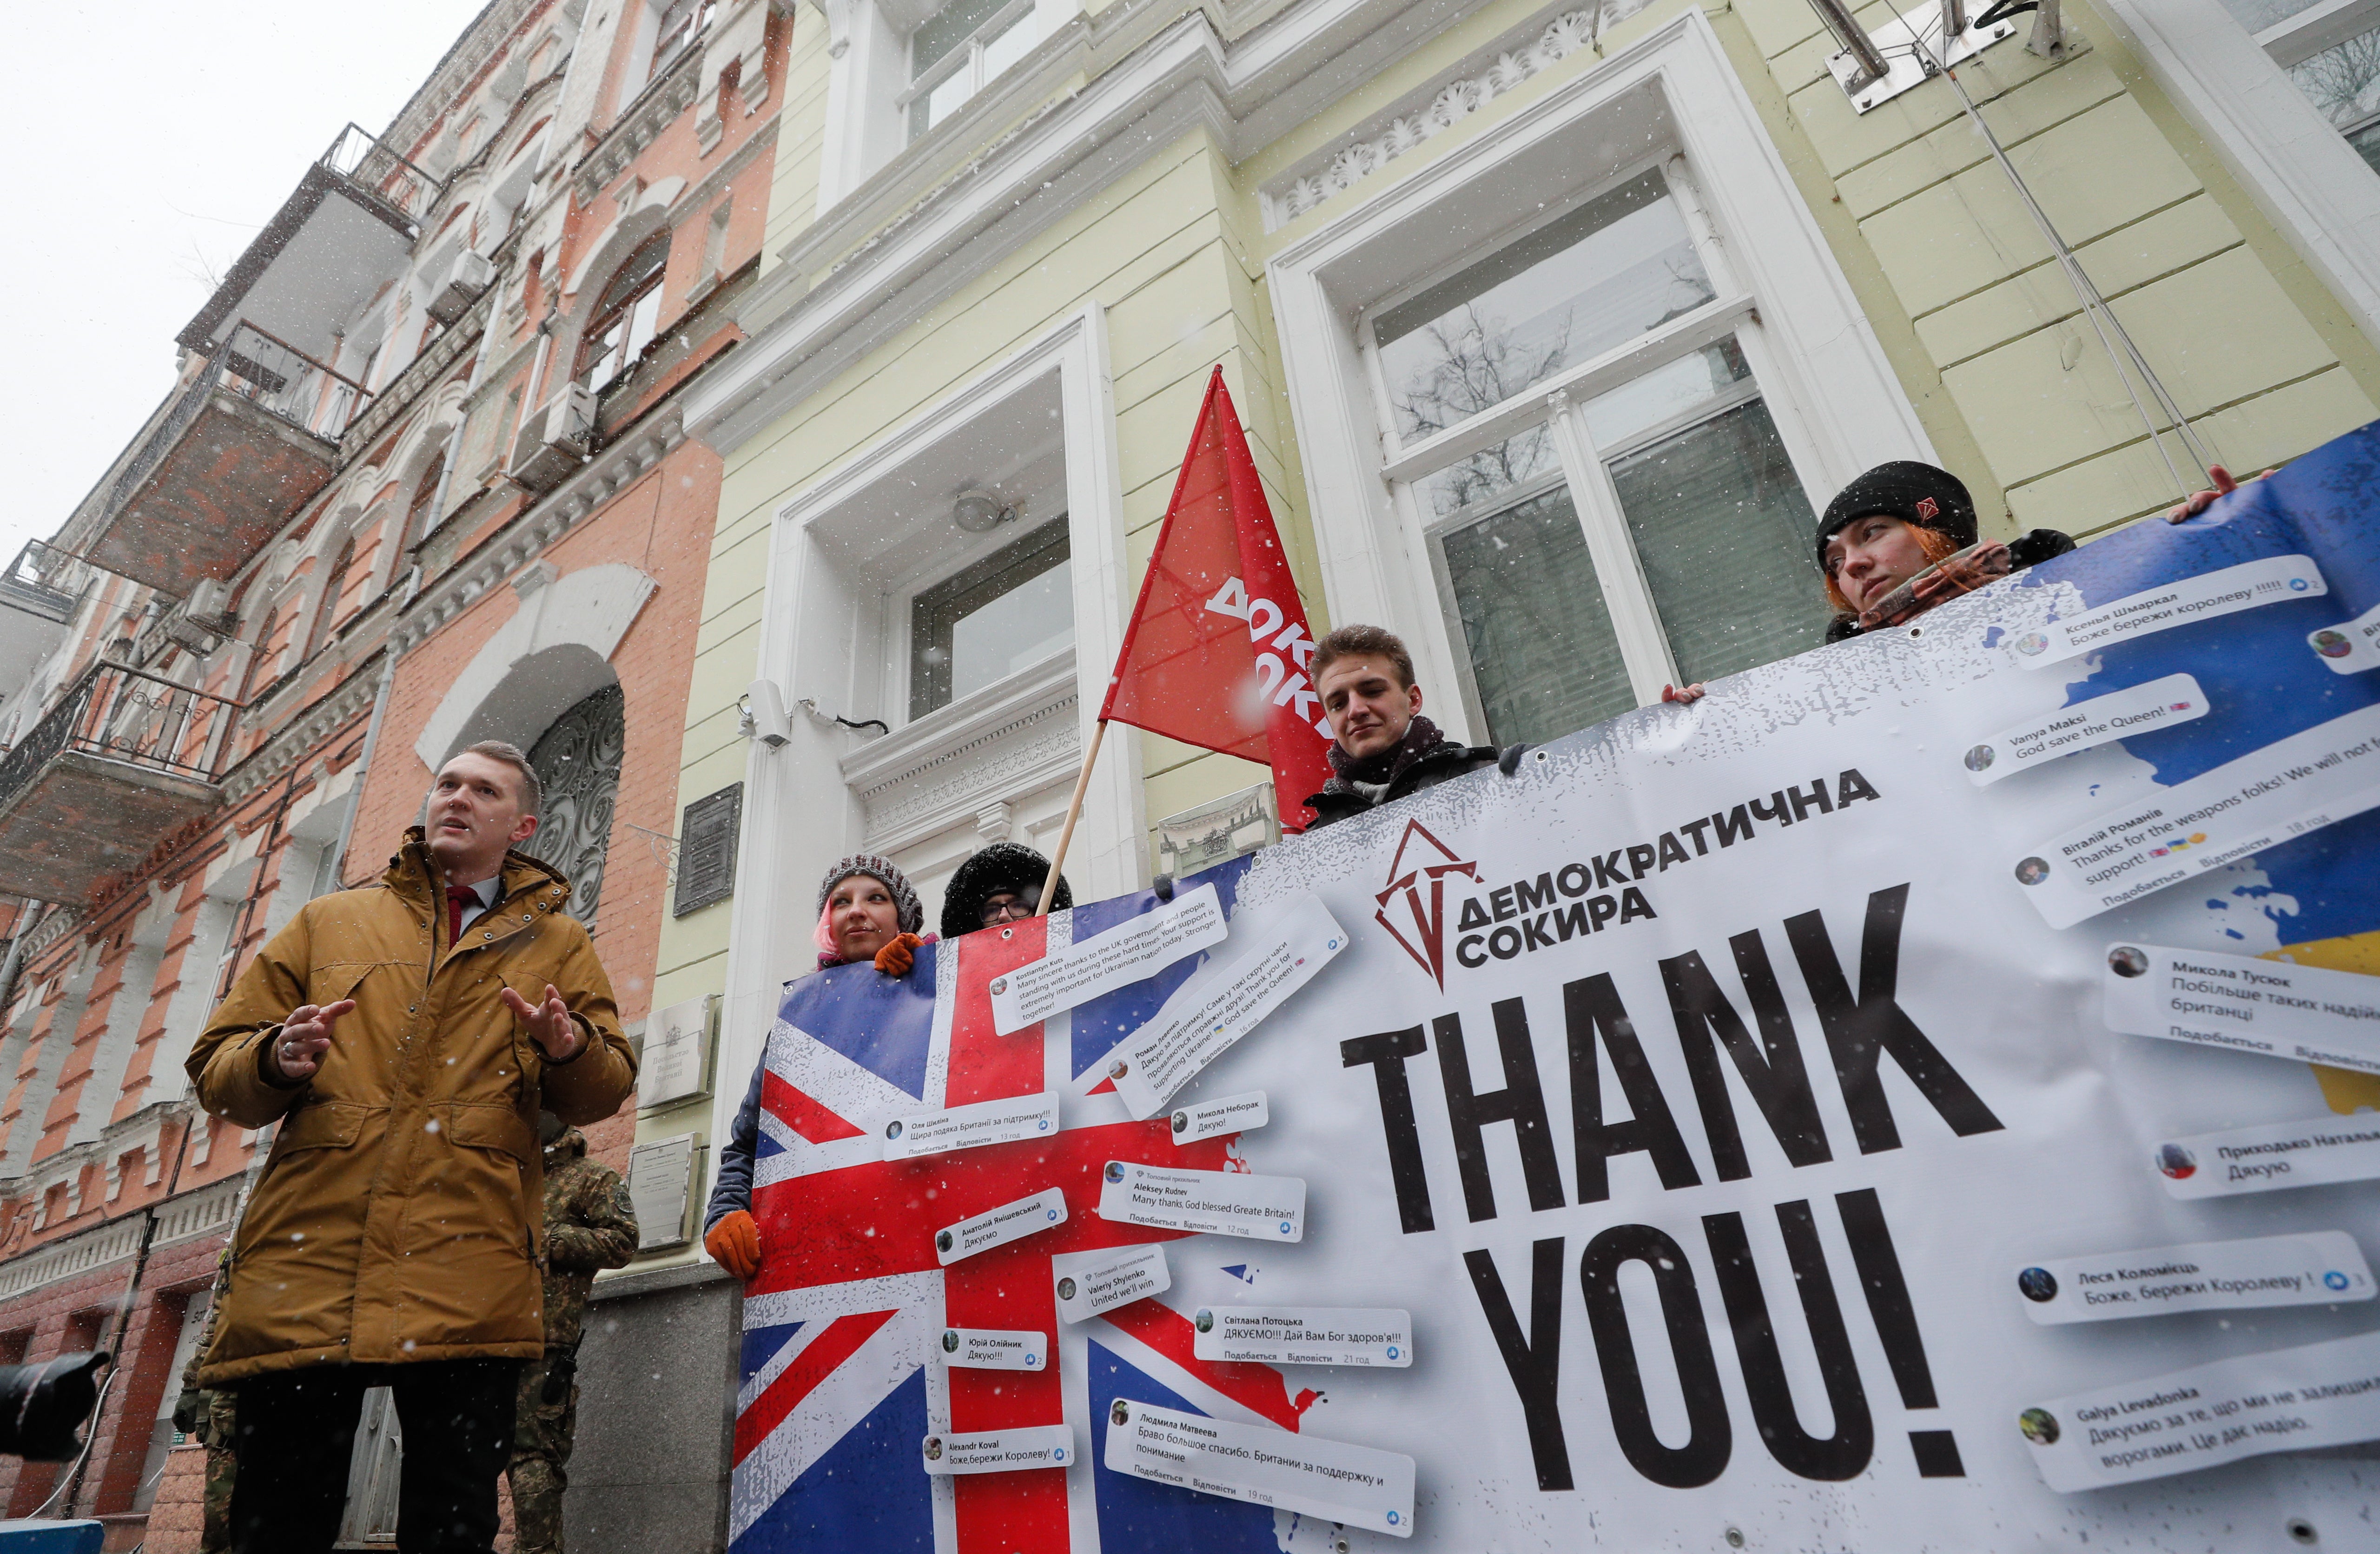 Members of the 'Demokratychna Sokyra' (Democratic Axe) pose with a banner near the UK embassy in Kiev